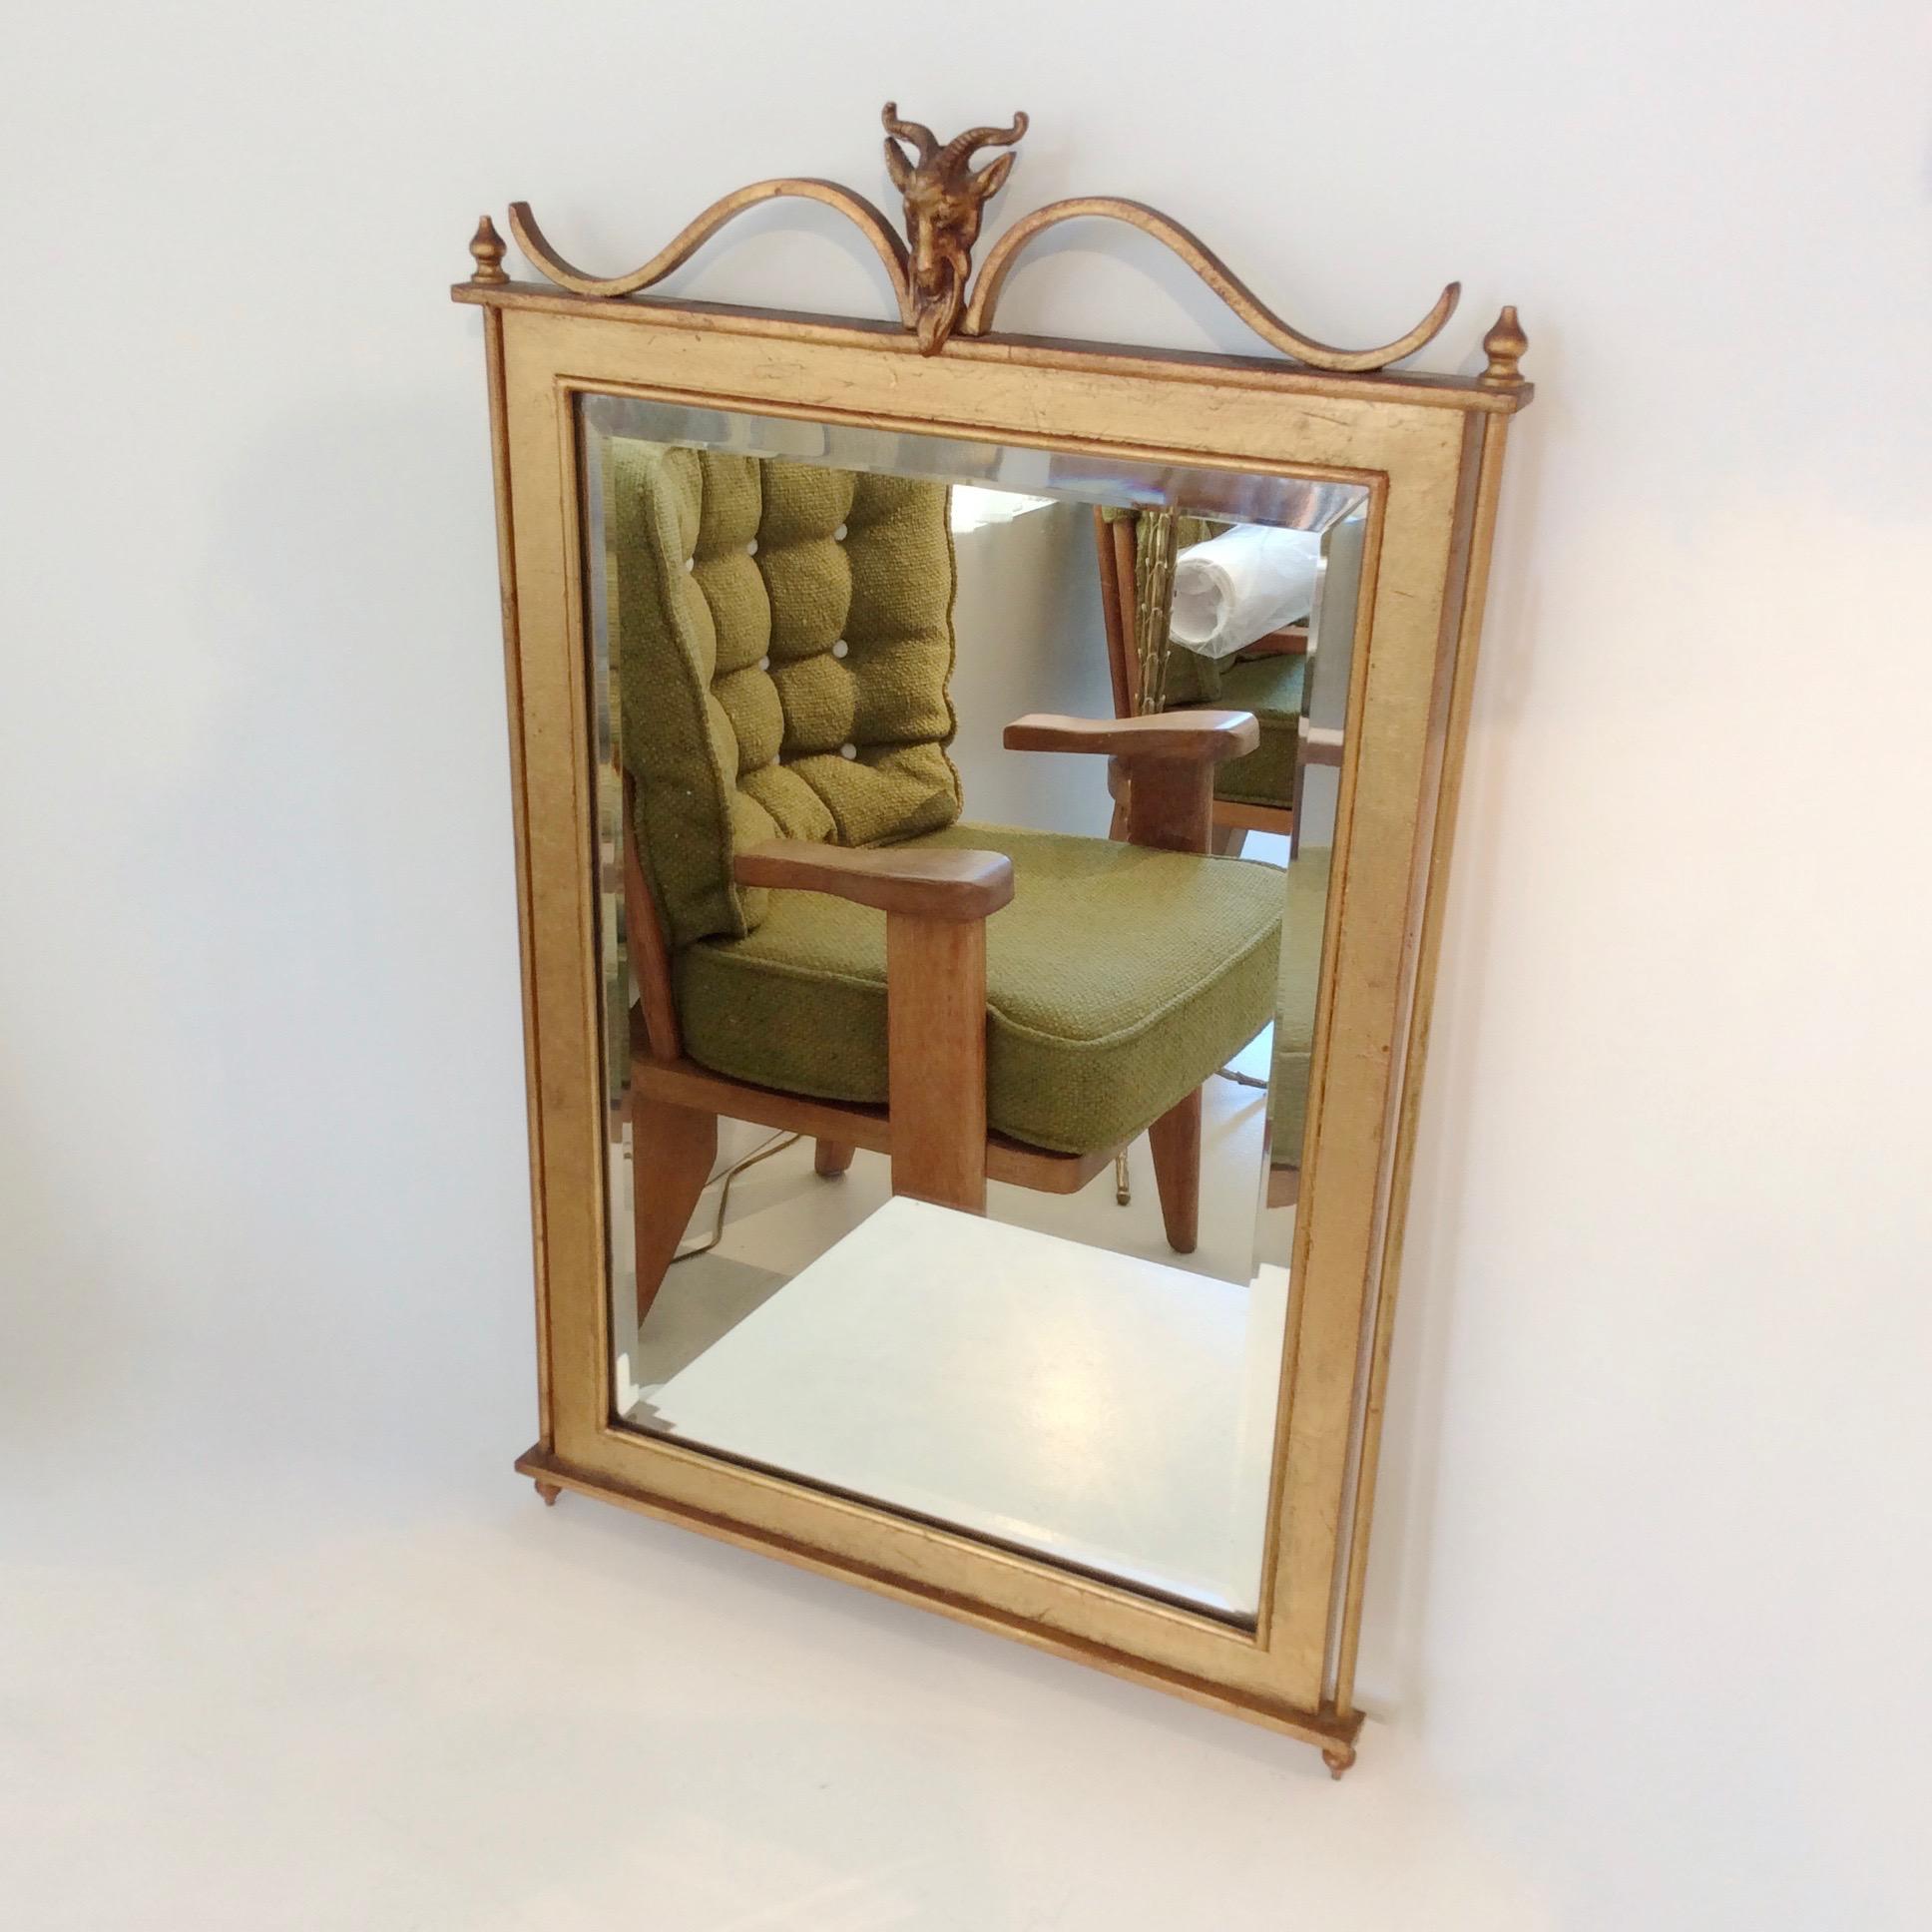 Nice gilt metal wall mirror, circa 1940, France.
Gilt metal frame, beveled mirror.
Dimensions: 69 cm H, 44 cm W, 2 cm D.
Good original condition.
All purchases are covered by our Buyer Protection Guarantee.
This item can be returned within 14 days